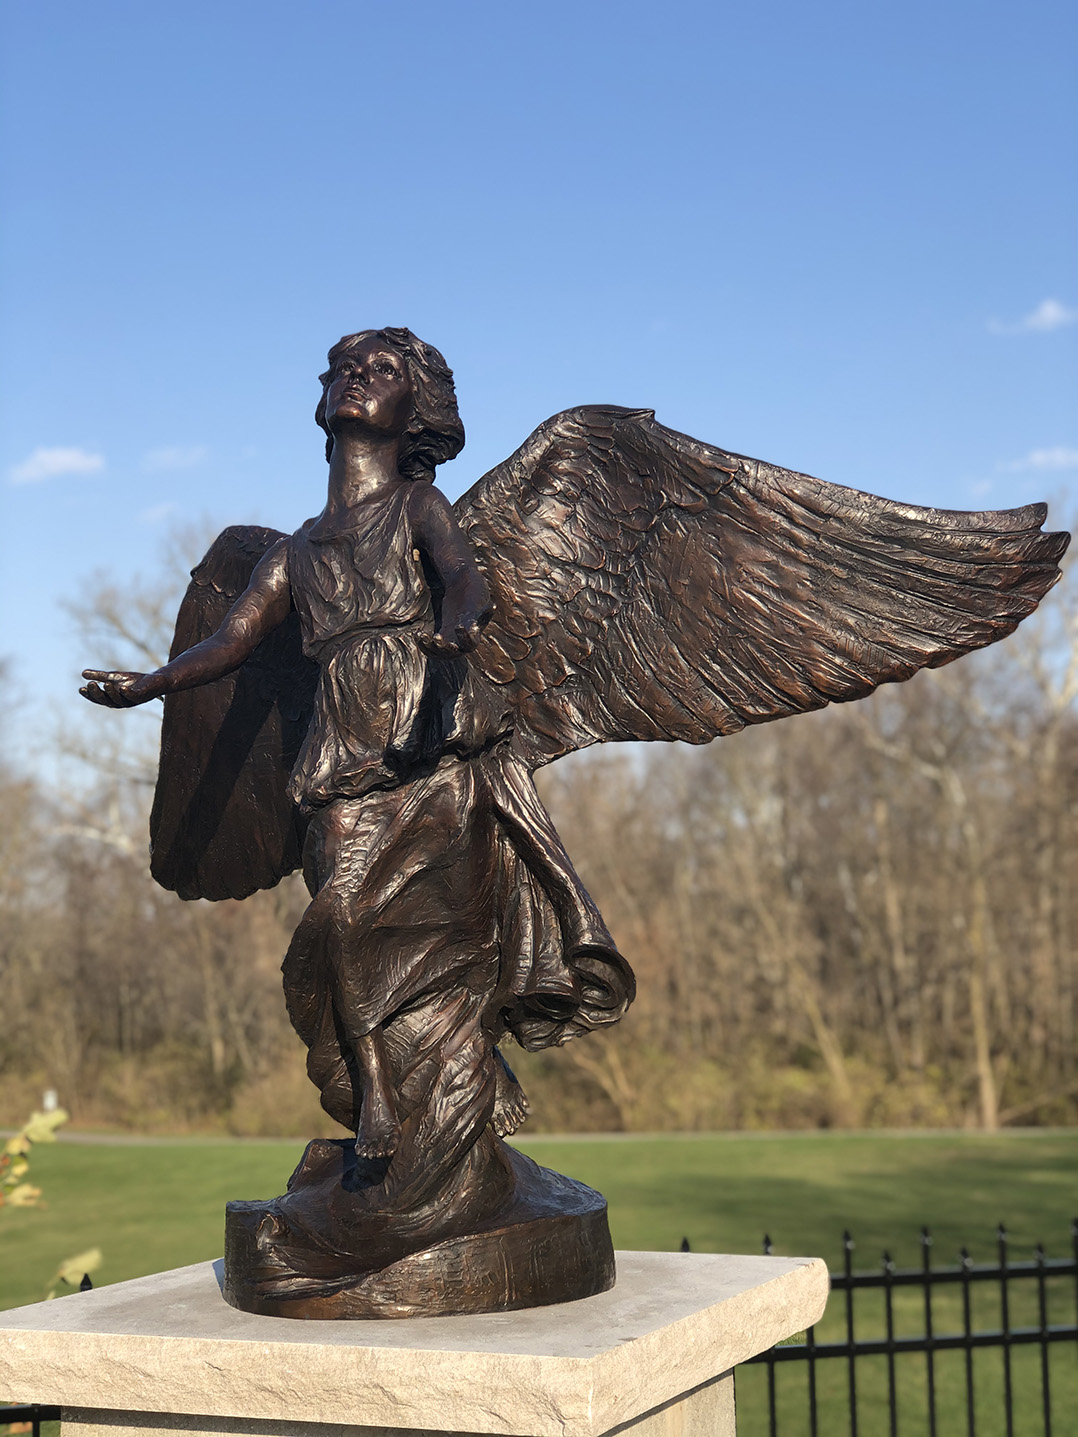 Fishers Parks Foundation reaches fundraising goal, dedicates Angel of